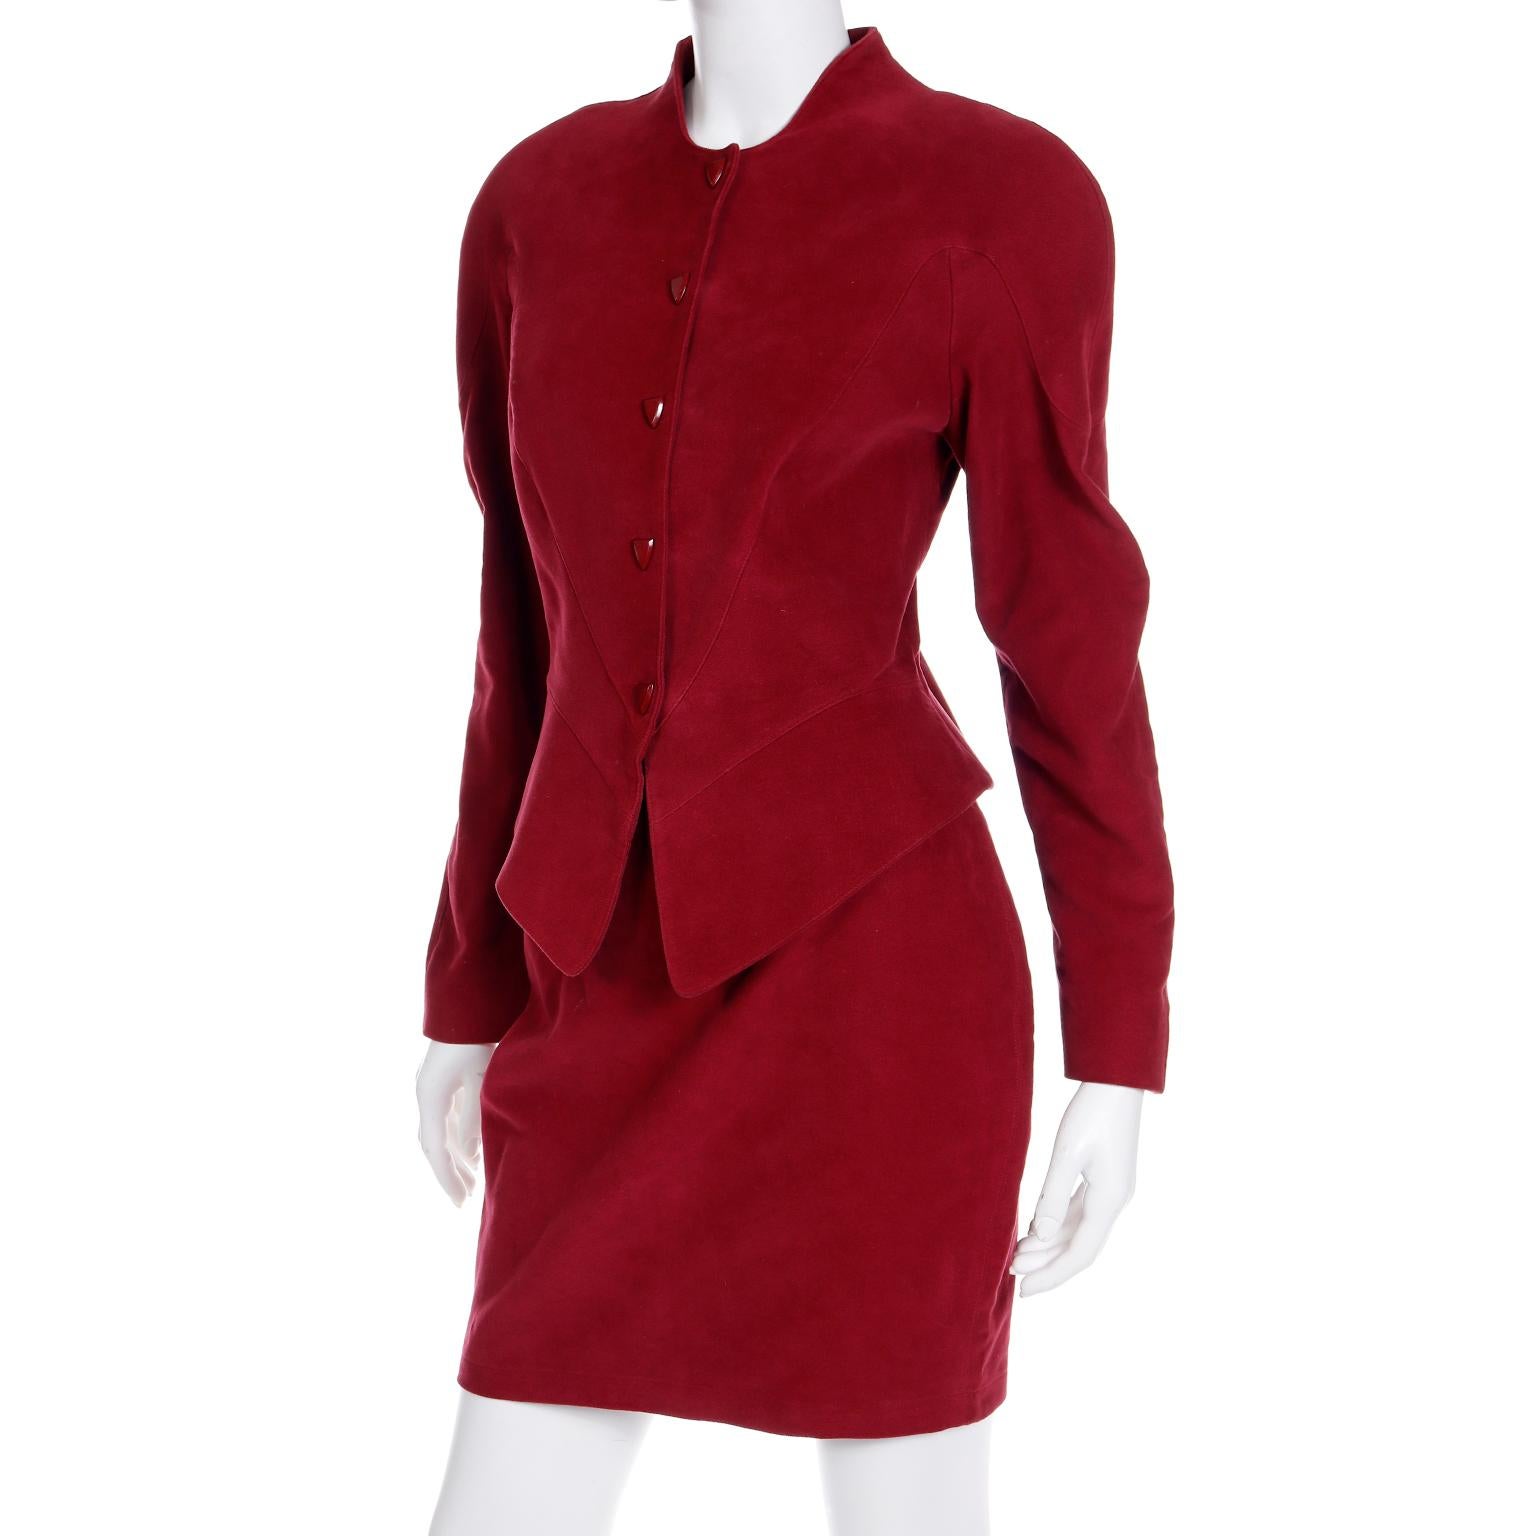 Thierry Mugler Vintage 1980s Brick Red Jacket & Skirt Suit Deadstock w Tags 1